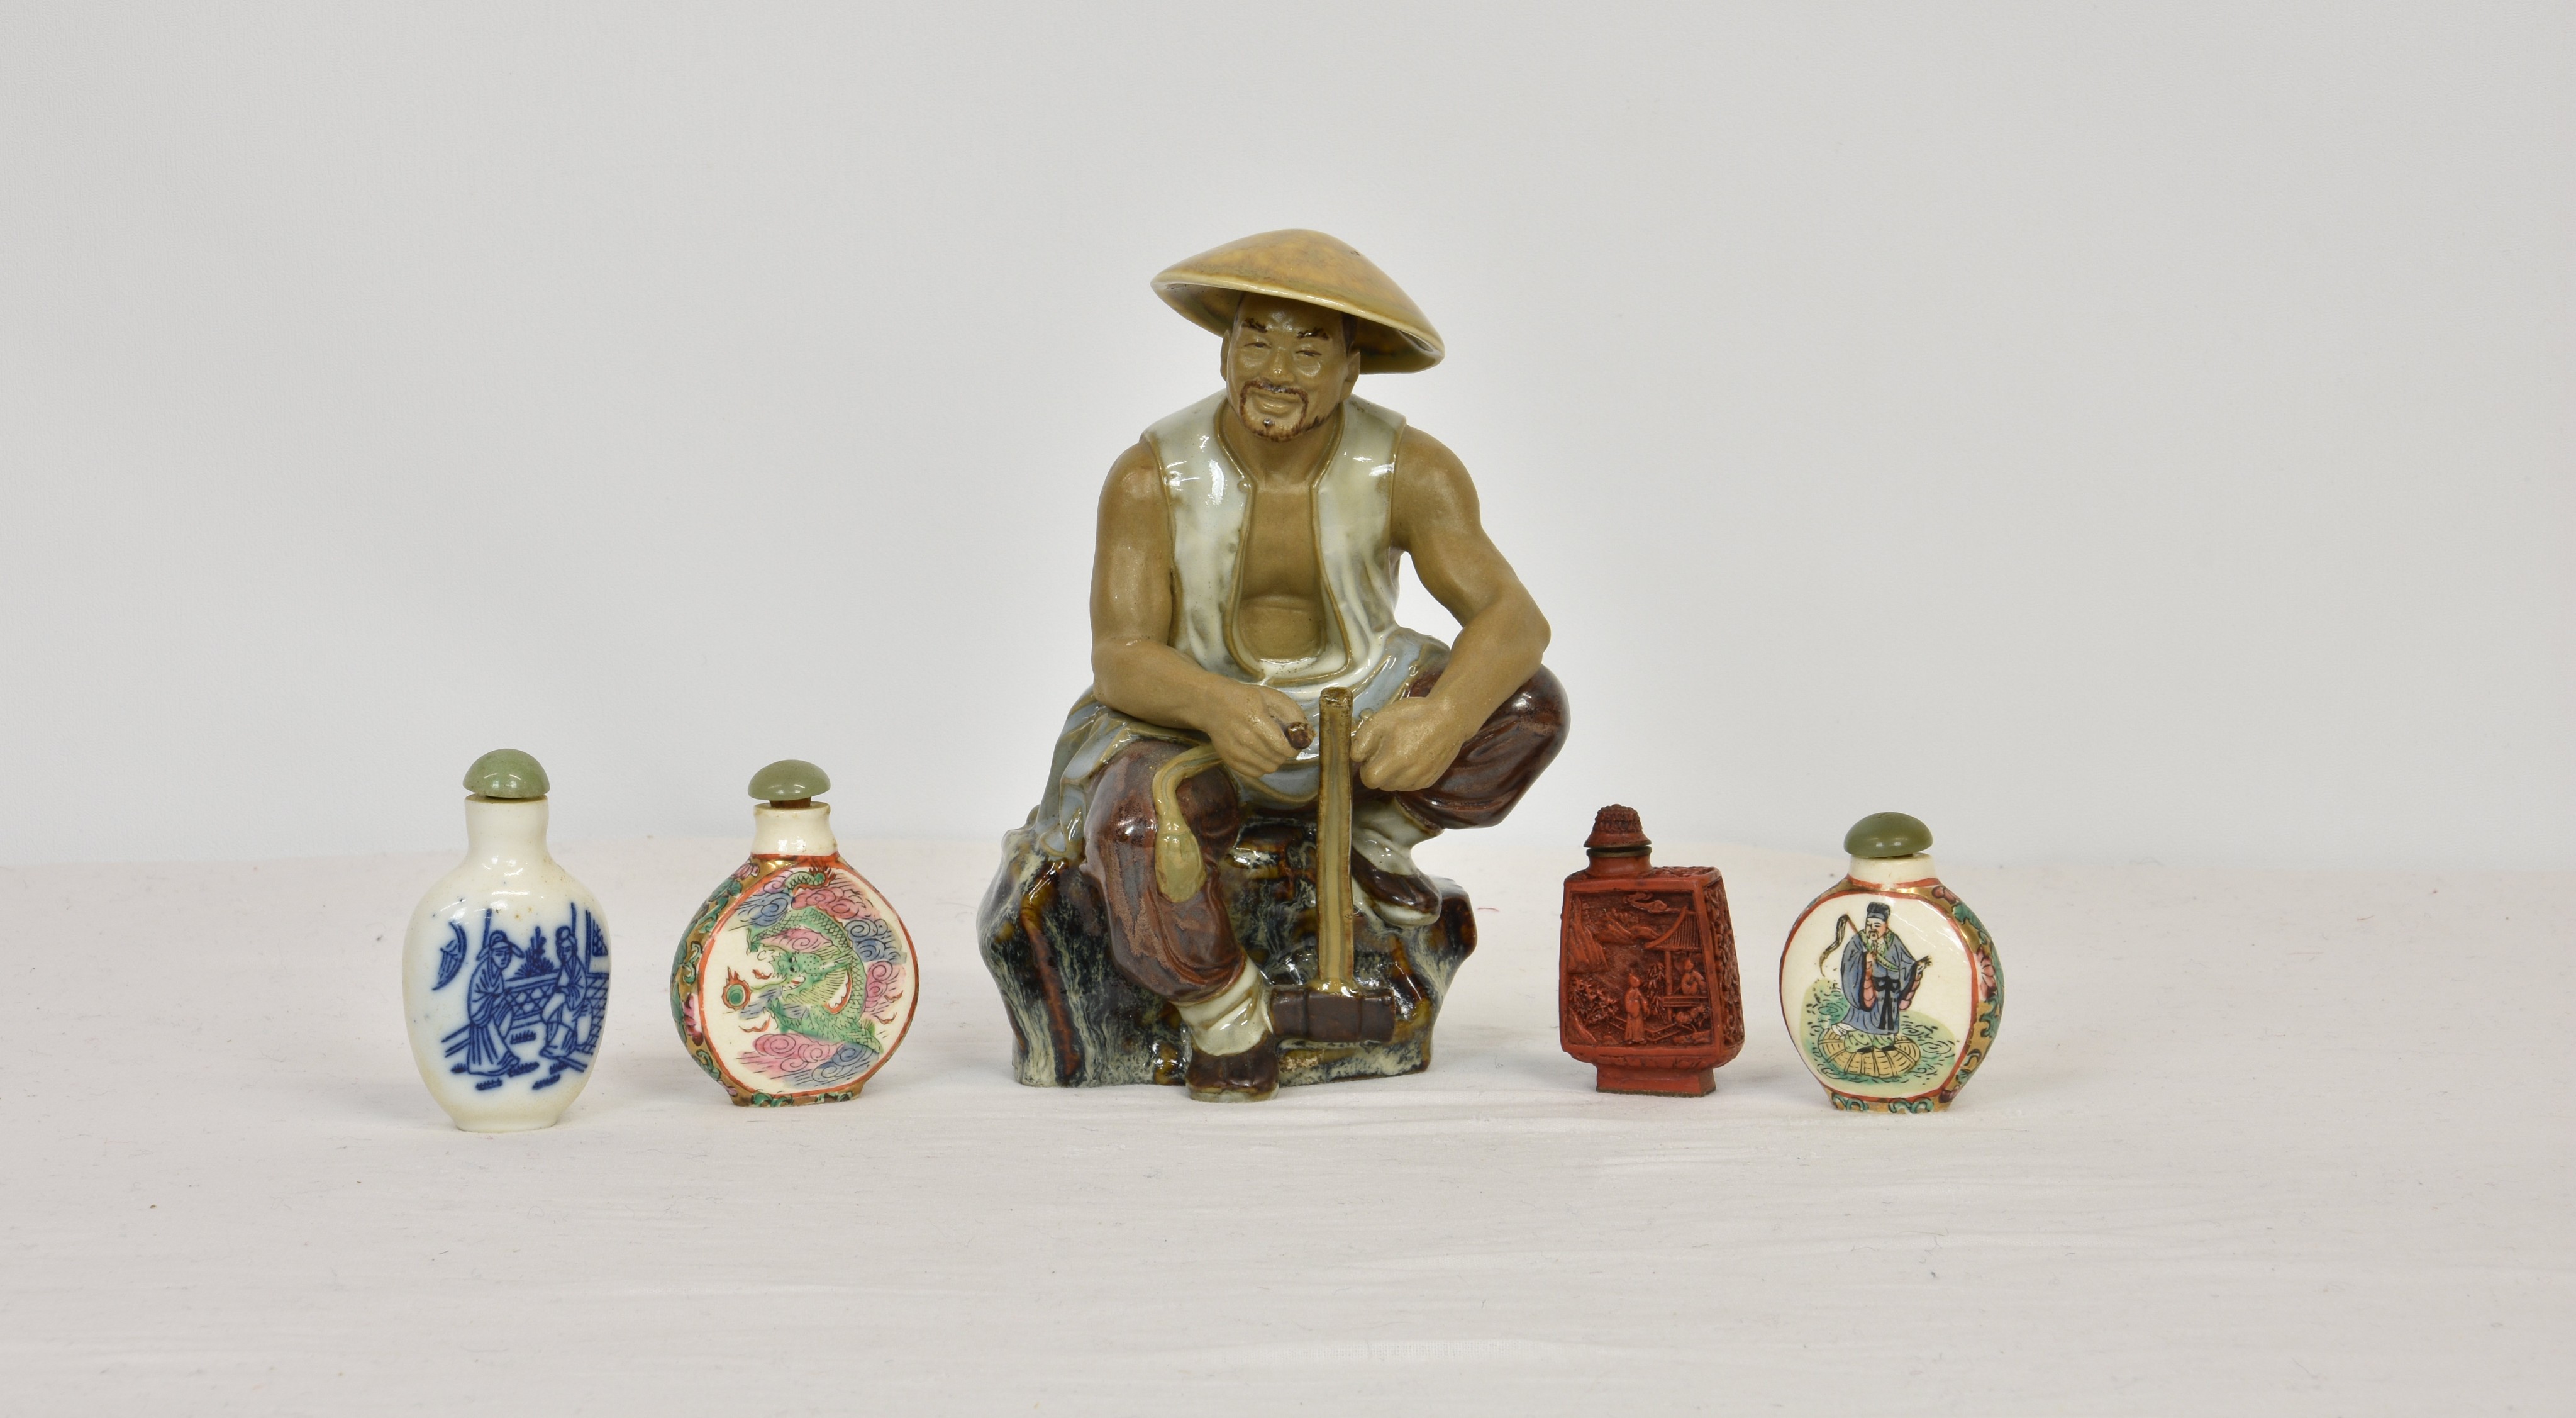 Four Chinese snuff bottles, three porcelain and one cinnabar lacquer, with stoppers, all with